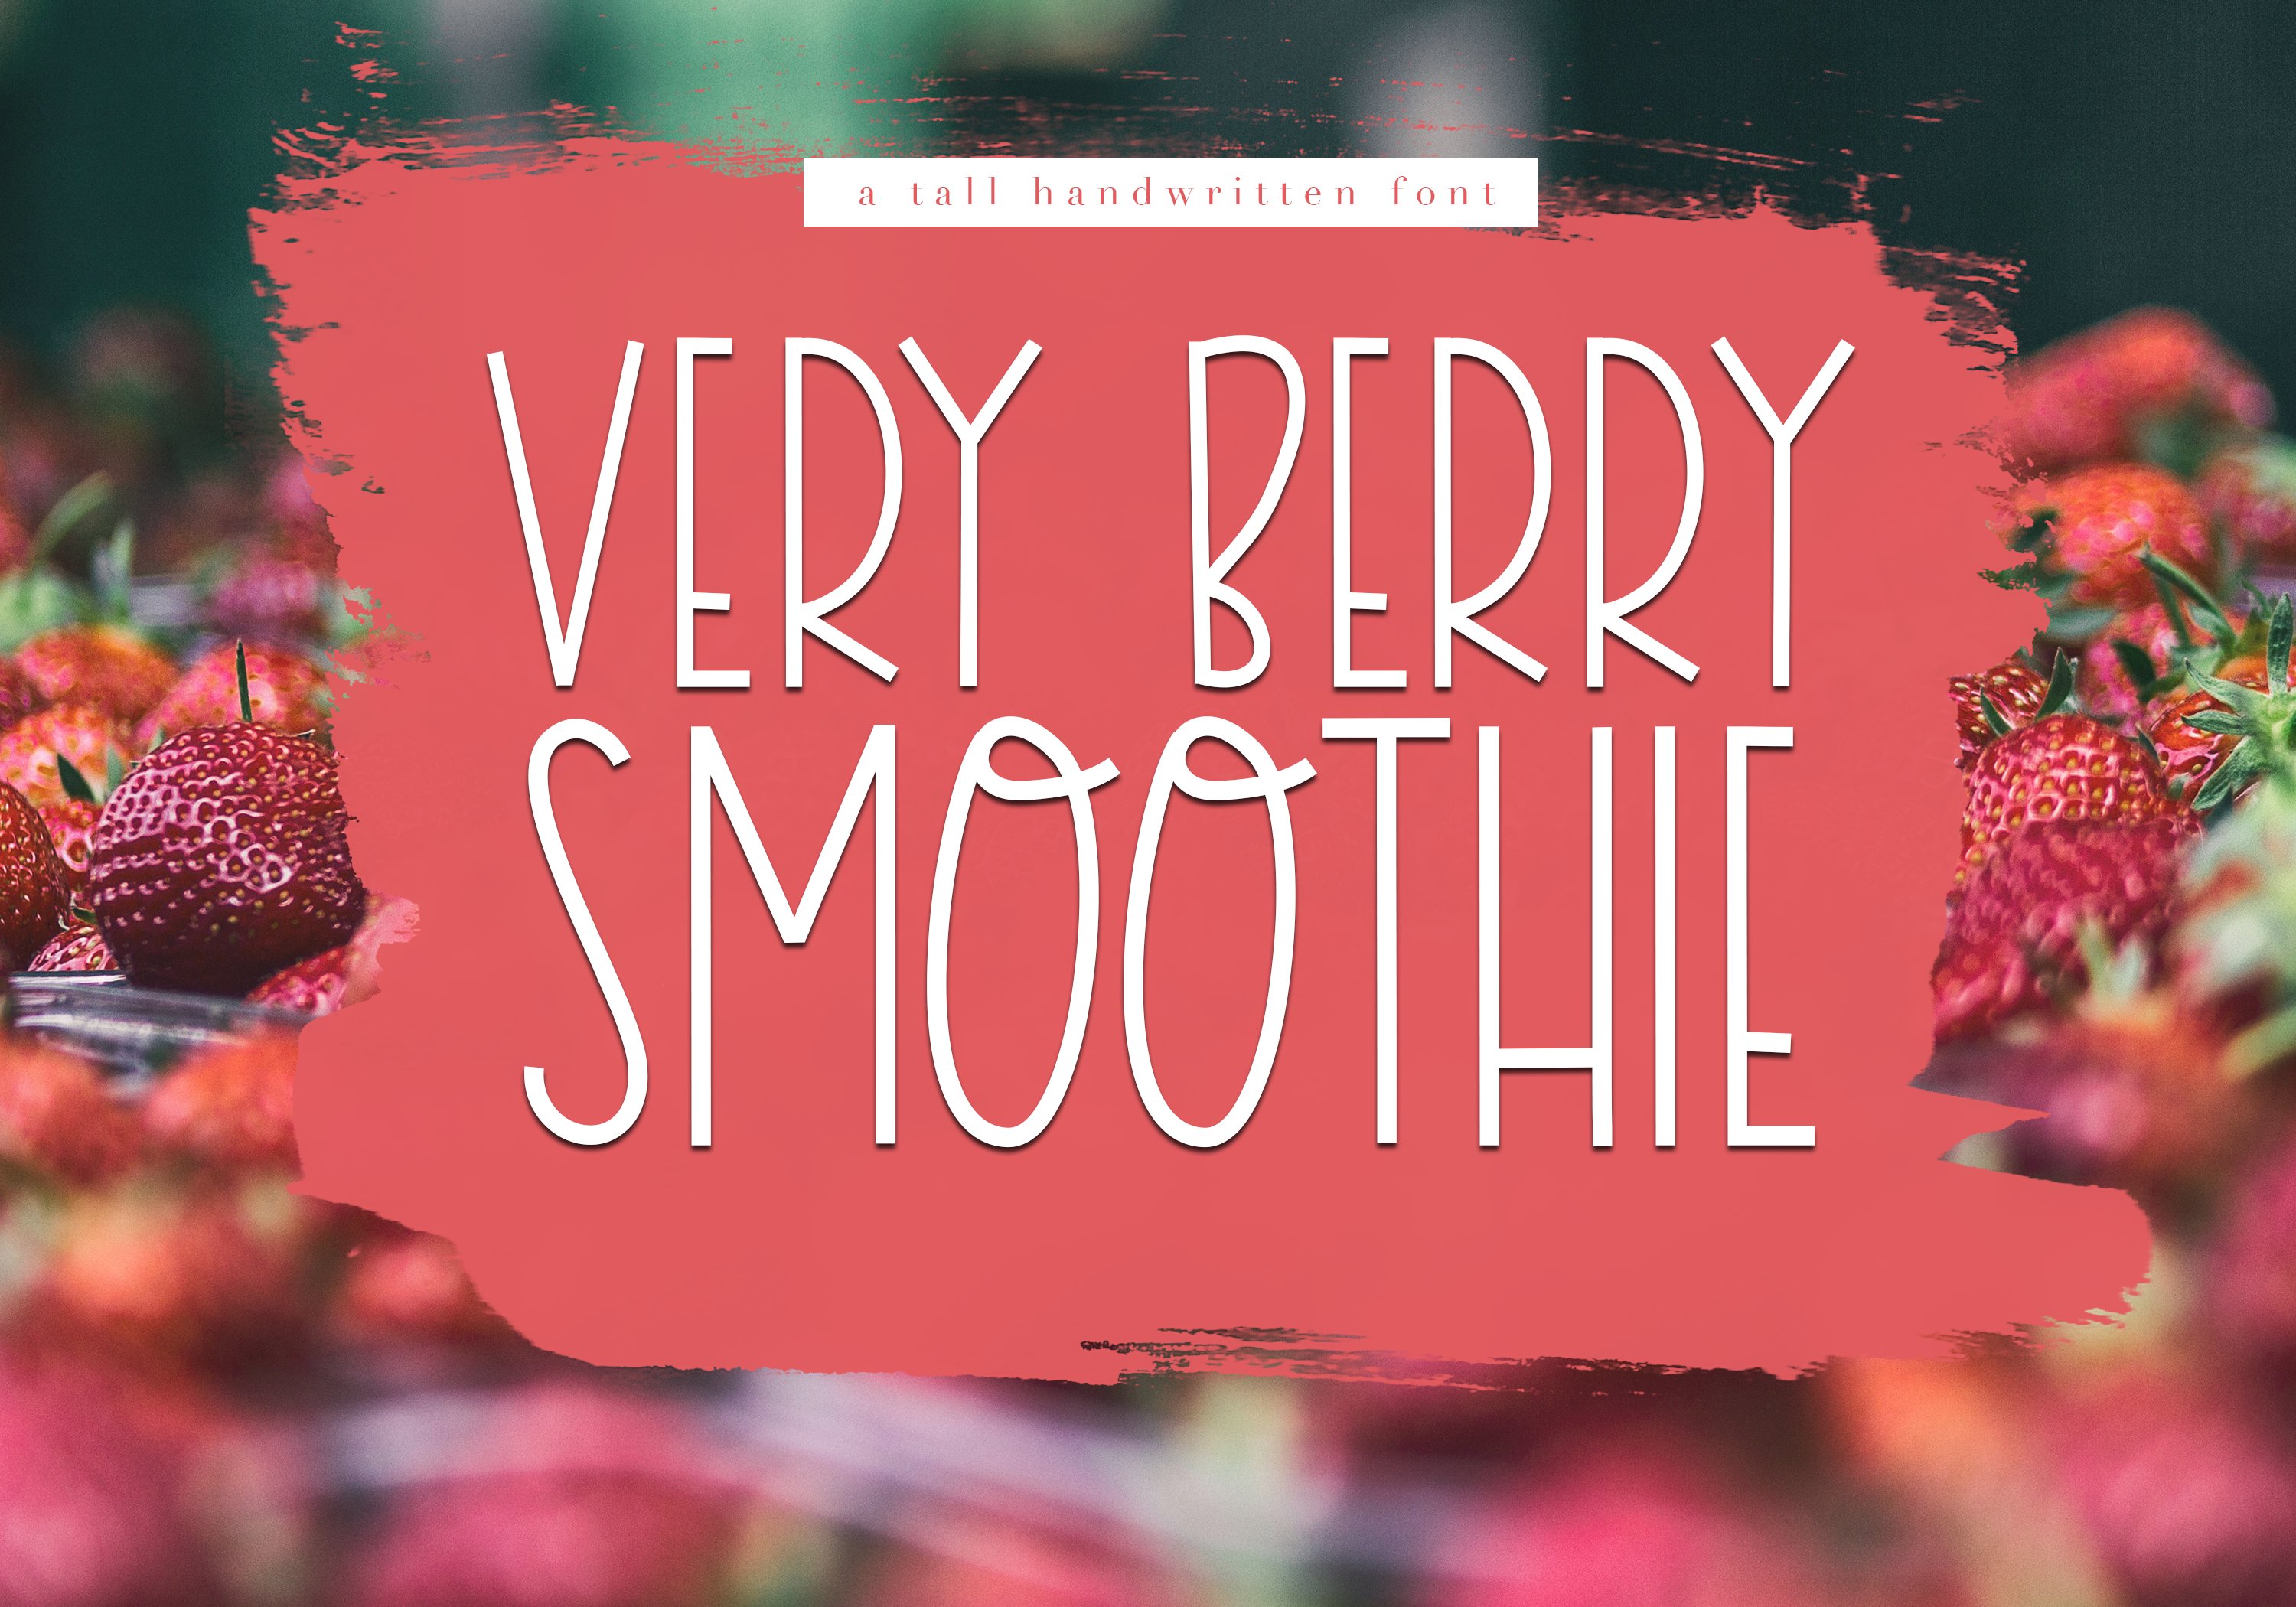 Very Berry Smoothie - A Tall Font cover image.